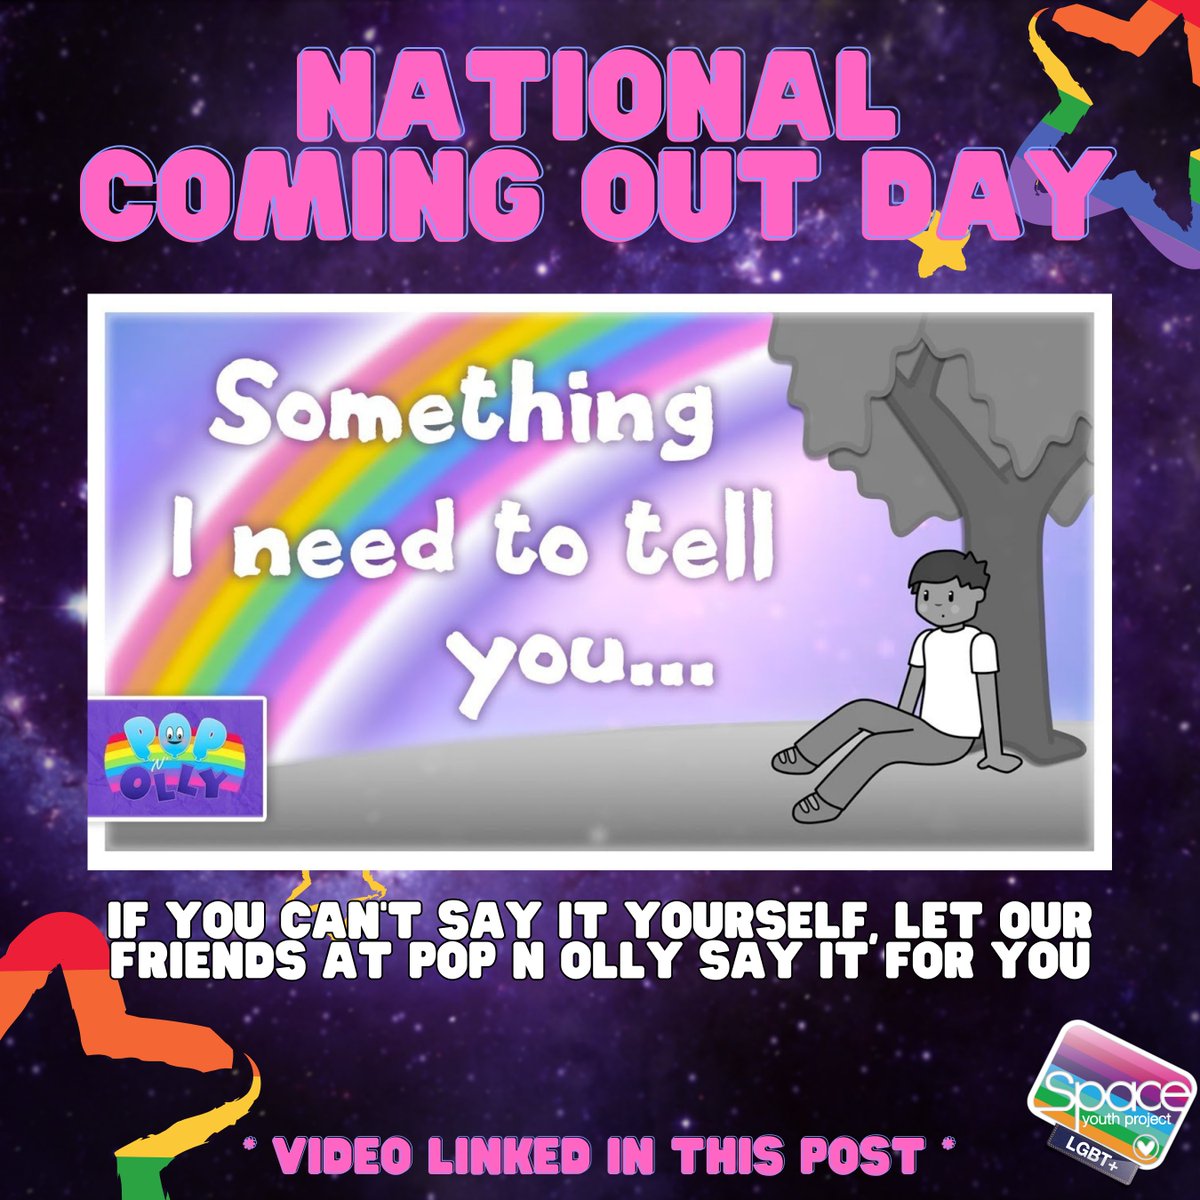 On this #NationalComingOutDay we wanted to provide something for those of you who can't say the words yourself. Our friends at @PopnOlly have the perfect video to help you, if you can't say it yourself then they can say it for you 💖 🌐 youtu.be/aMhRF7OqXLE #LGBT #LGBTplus